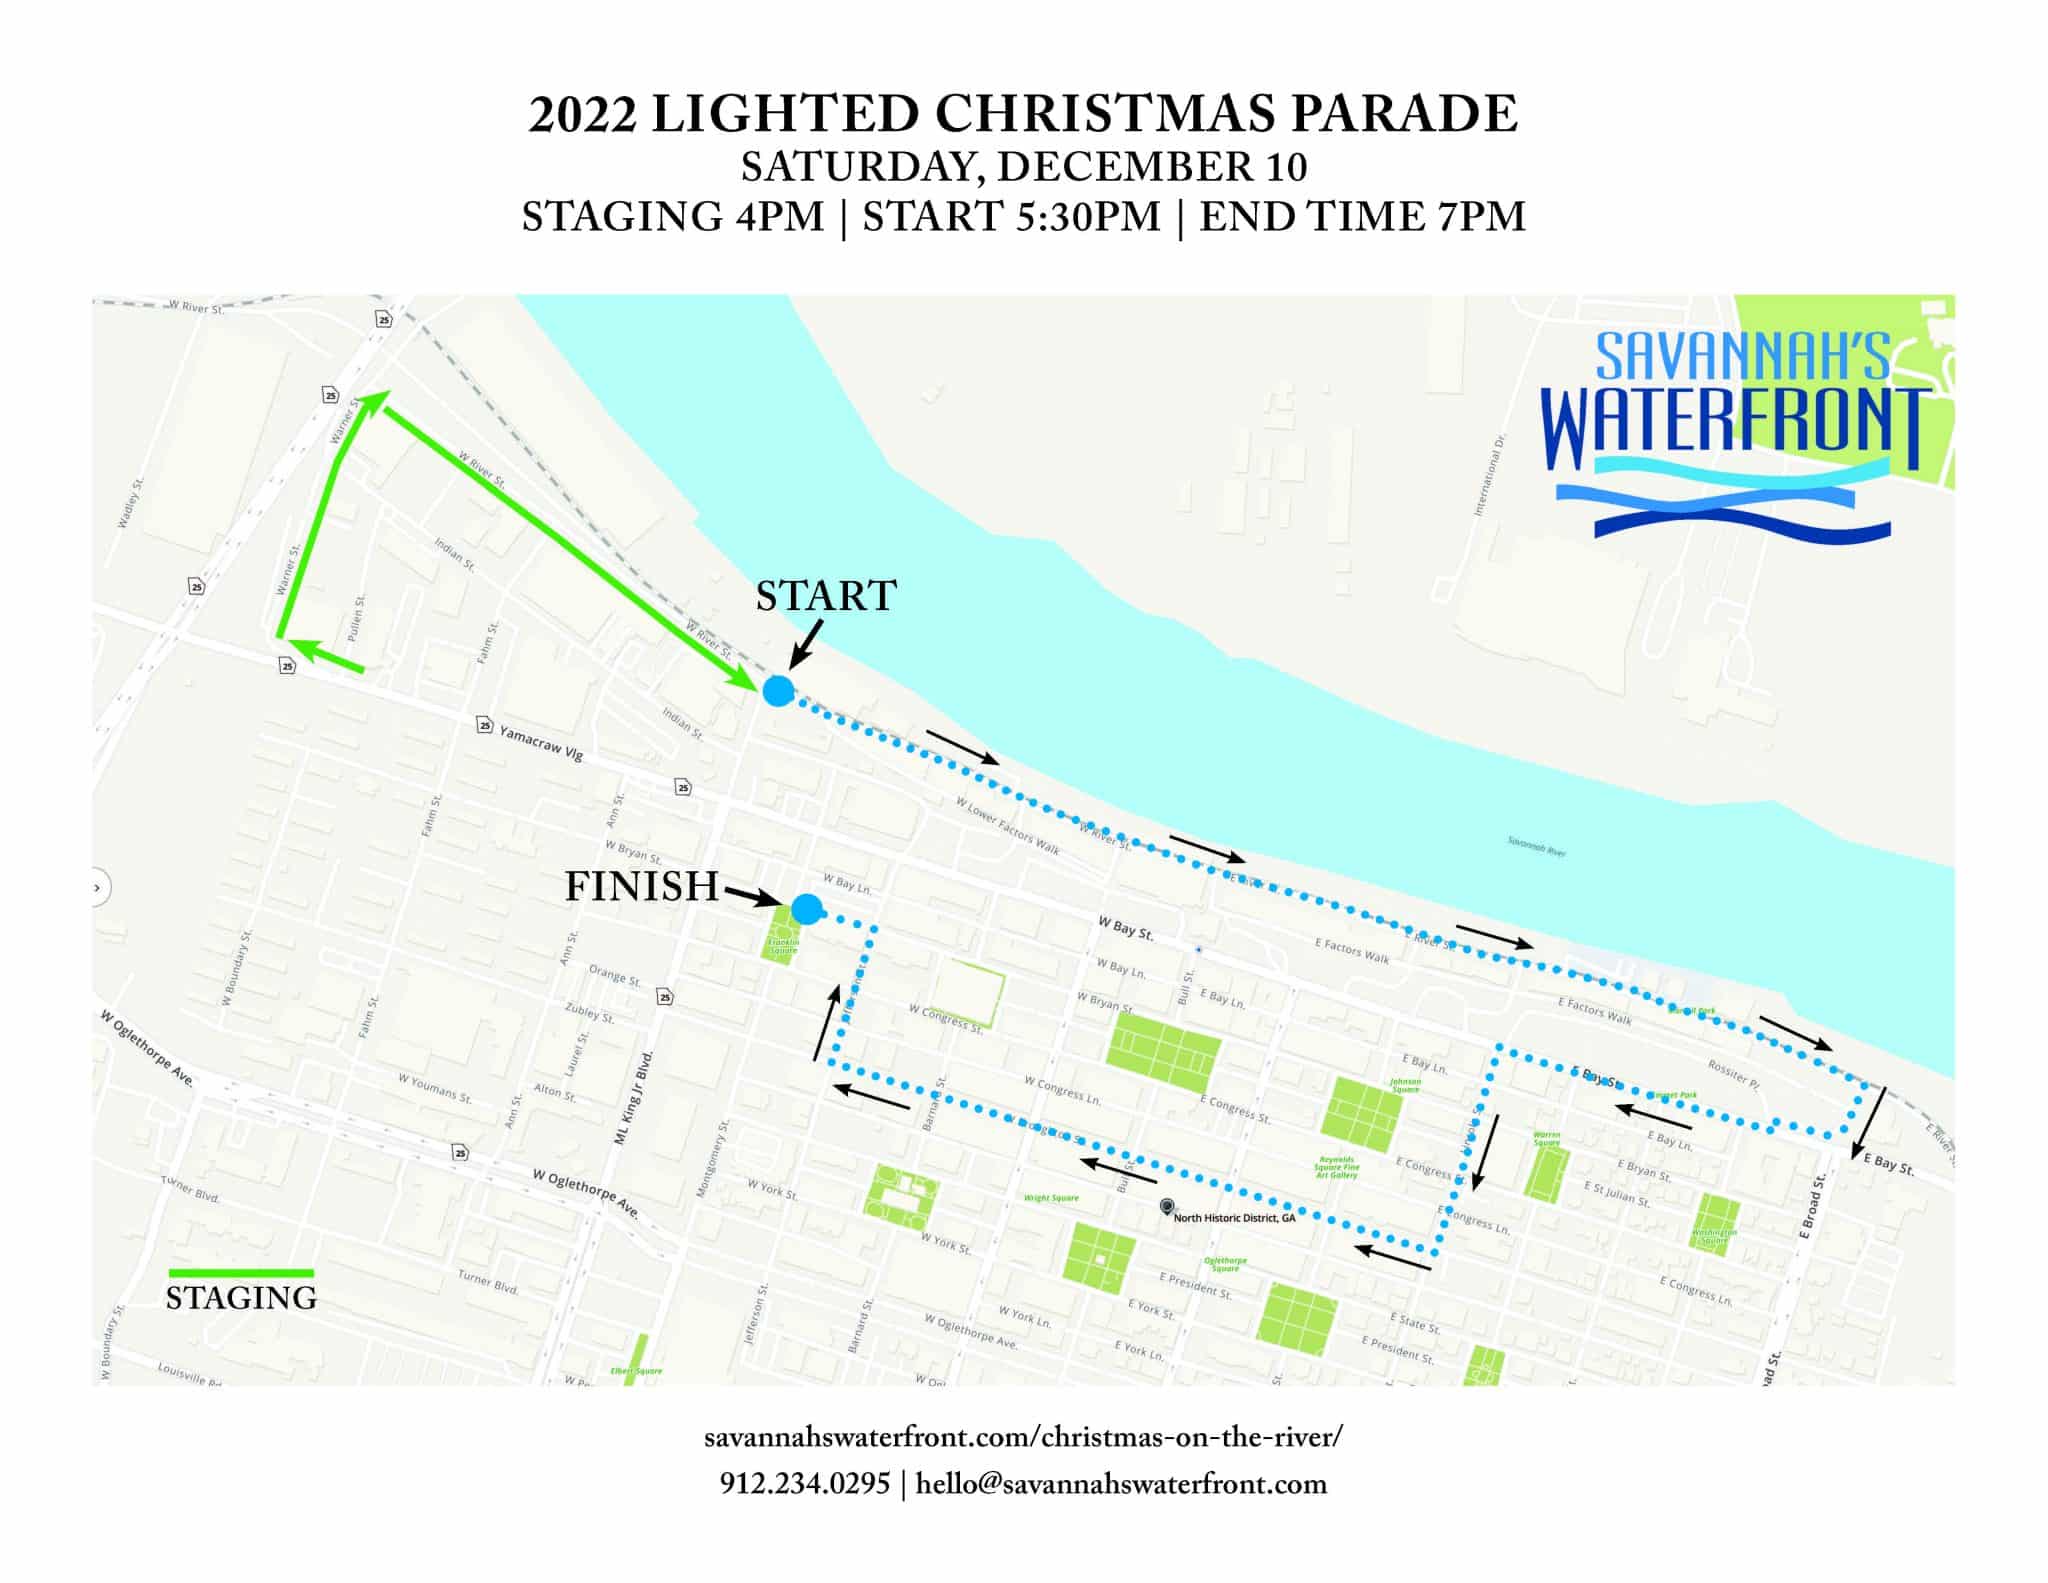 2022 Lighted Christmas Parade Route Map 002